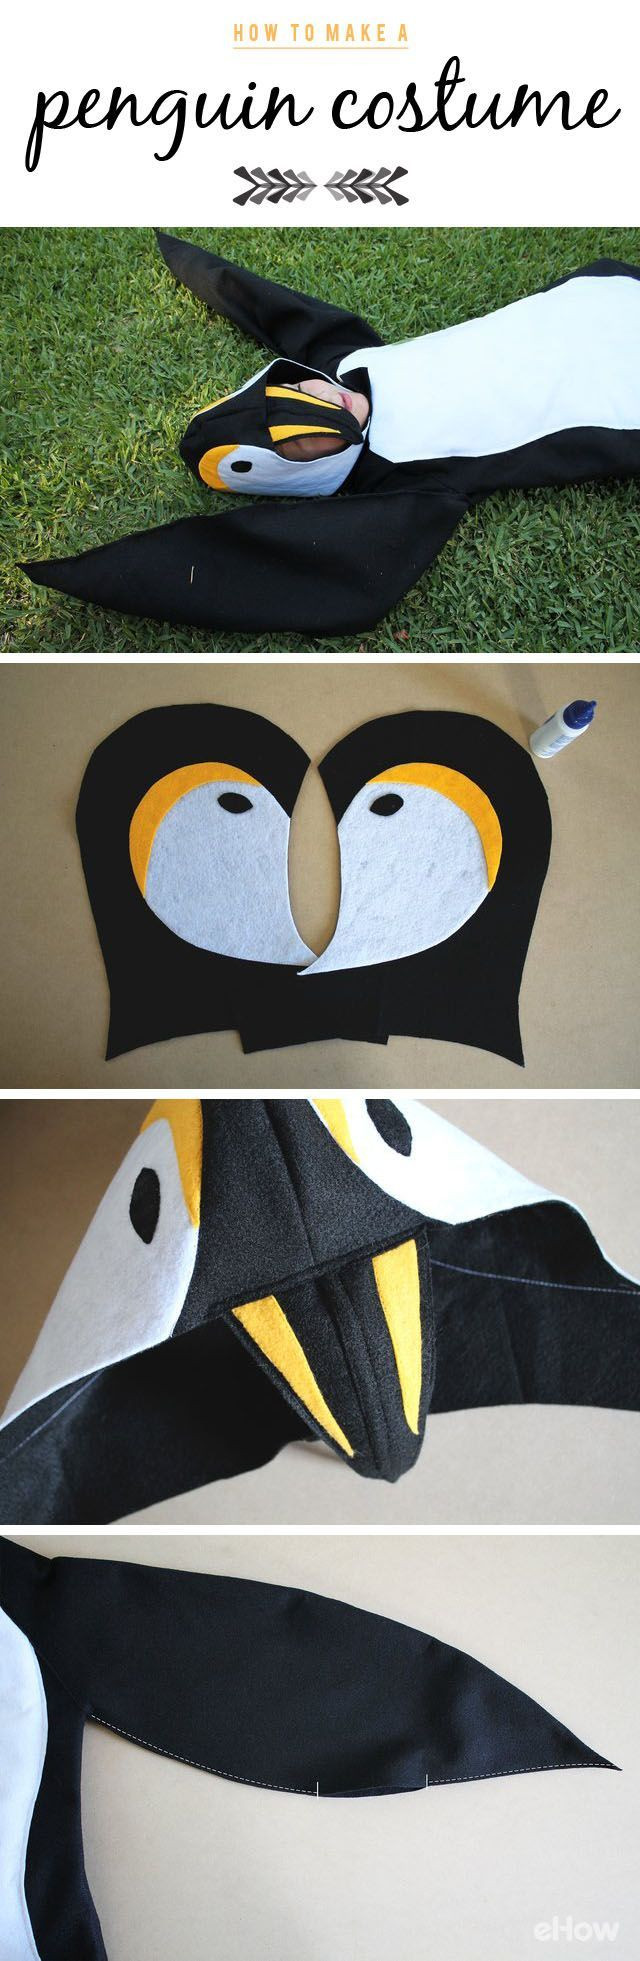 Penguin Costumes DIY
 How to Make a Penguin Costume